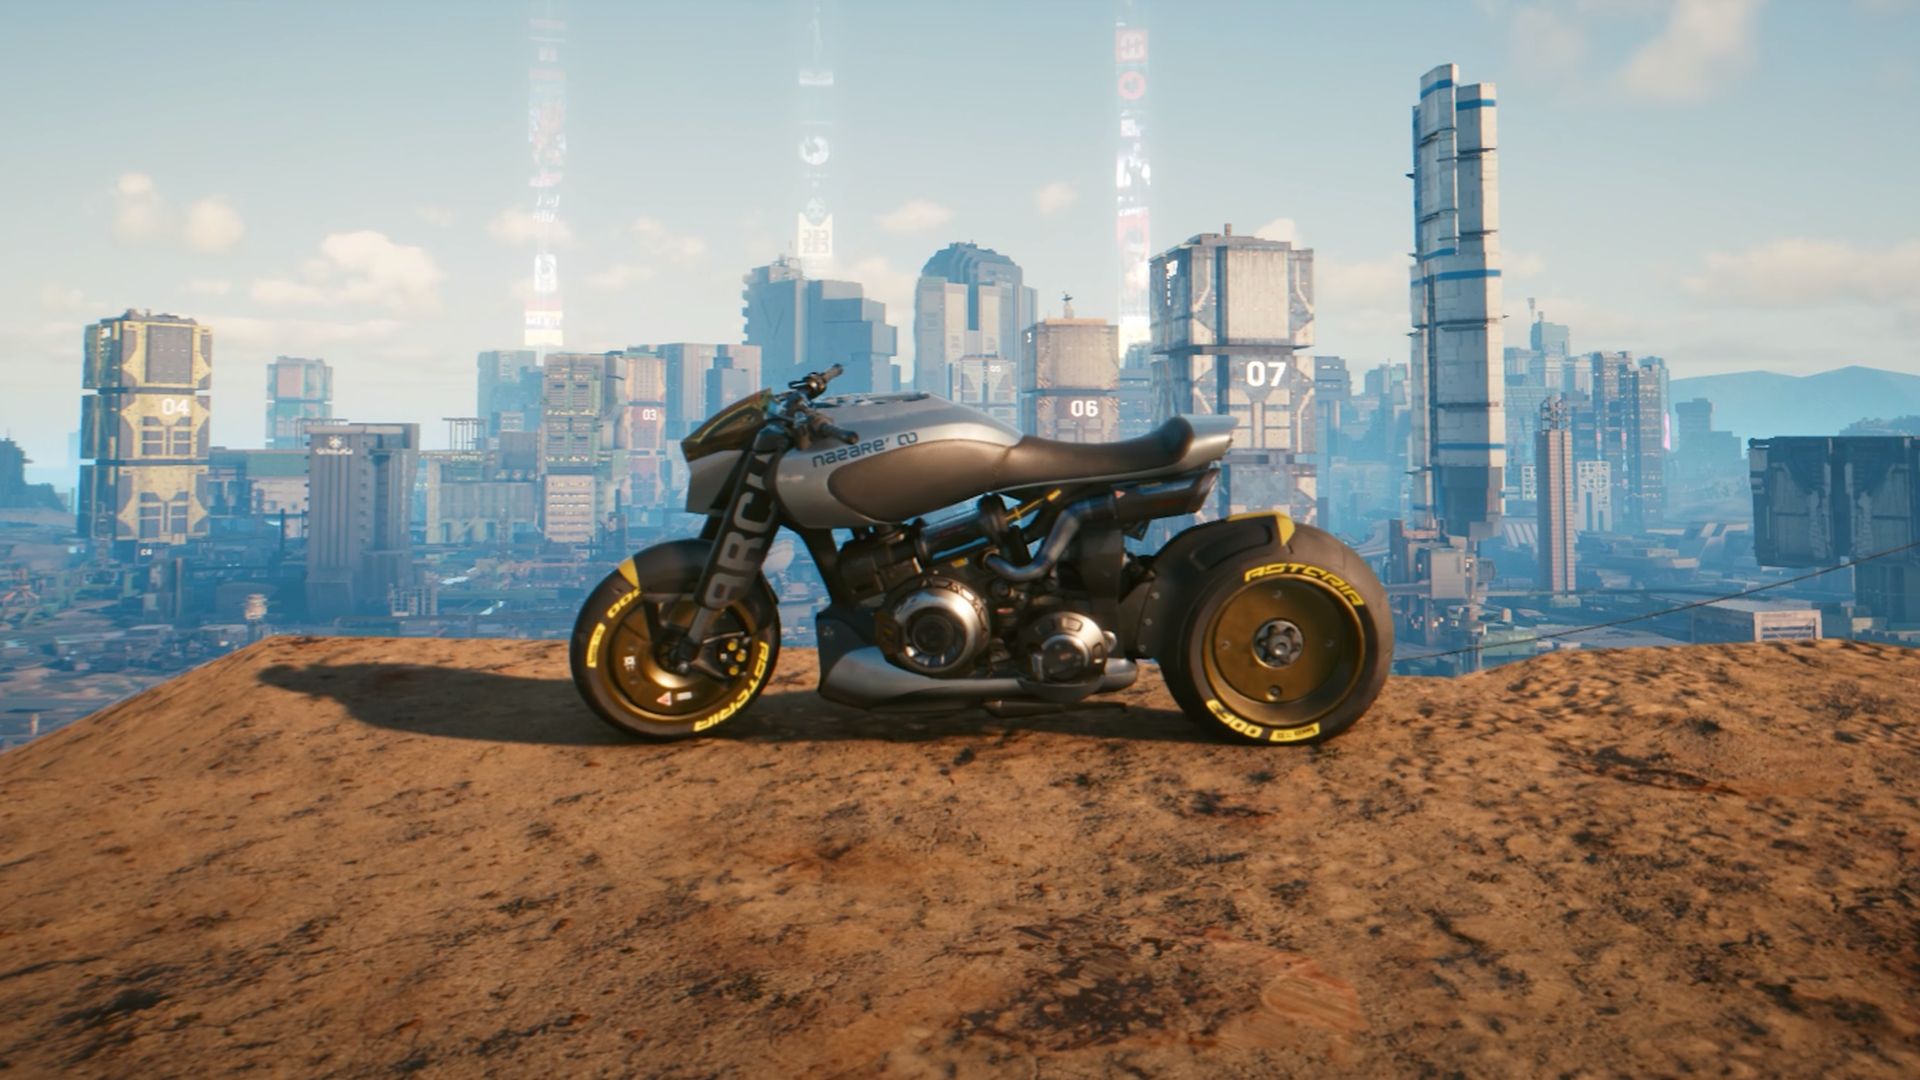 This Cyberpunk 2077 motorcycle is made by Keanu Reeves' company